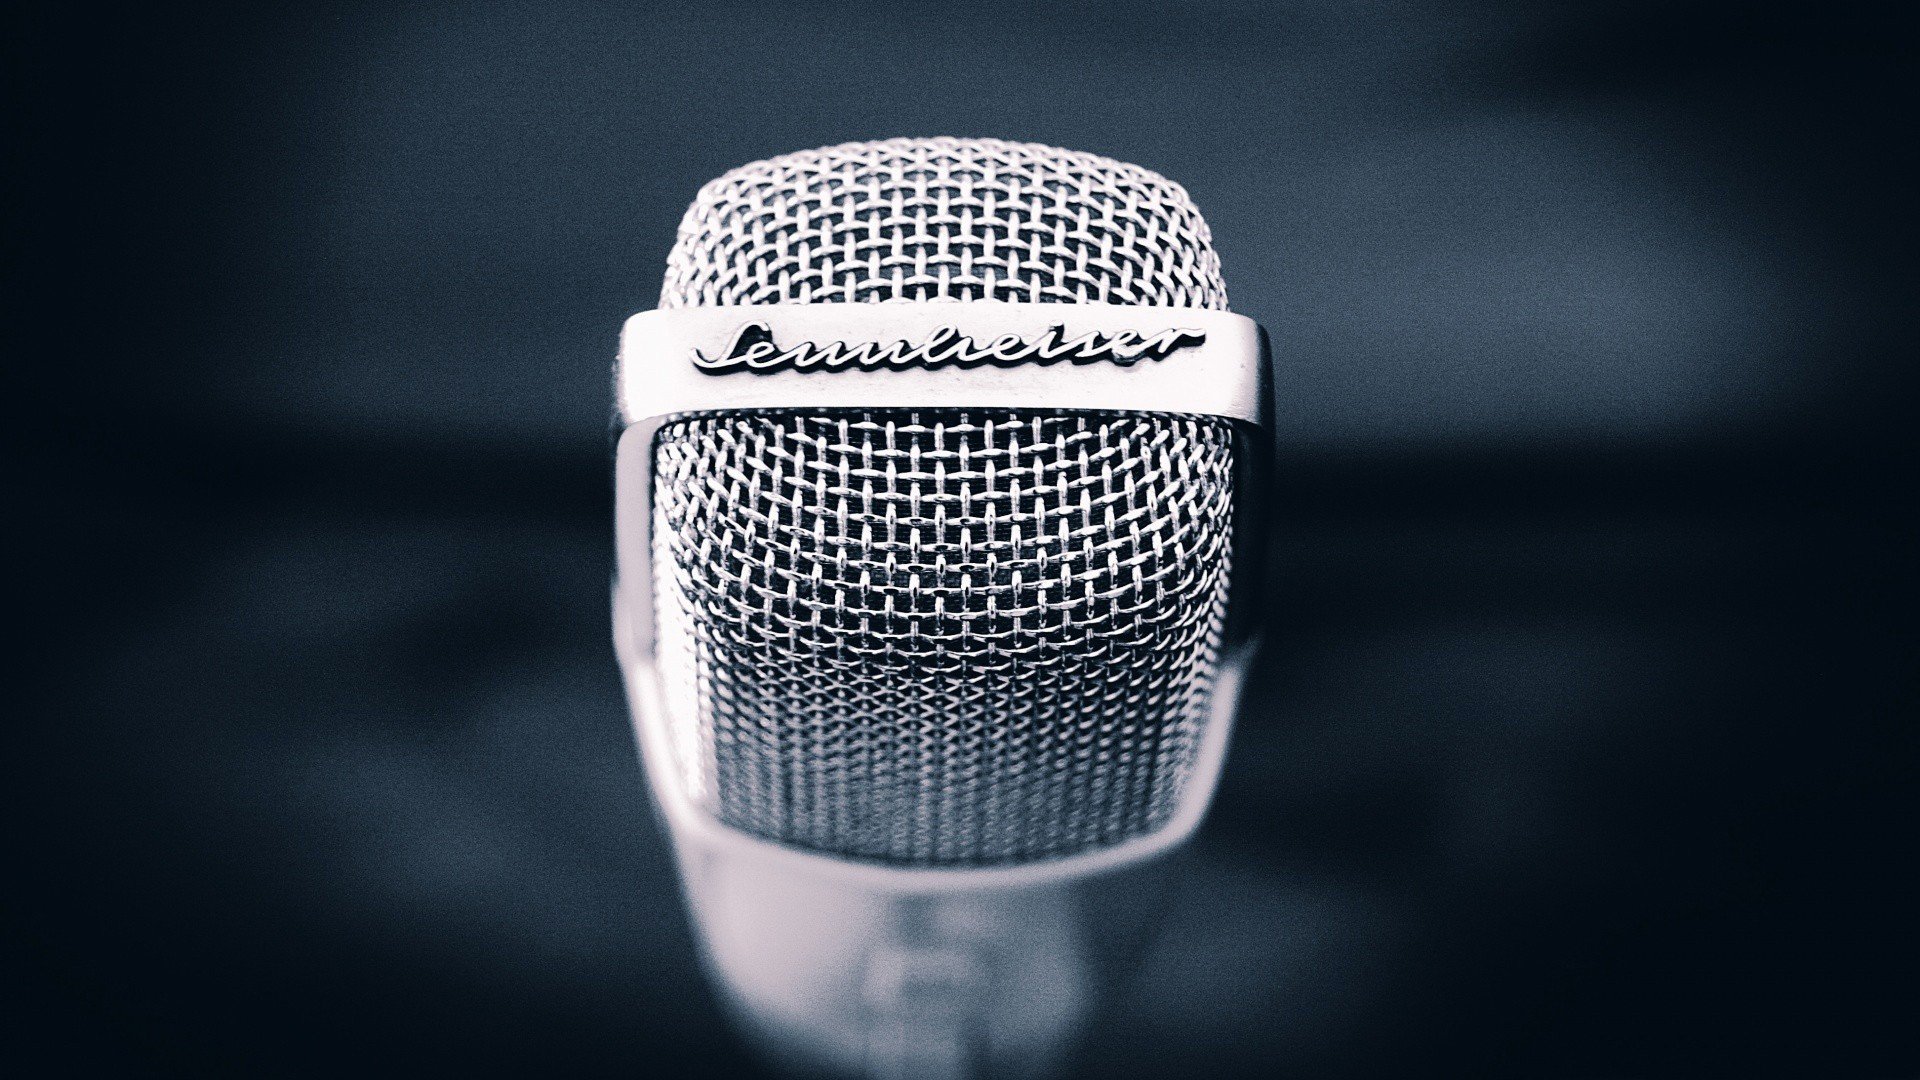 Best Microphone wallpaper ID:271506 for High Resolution full hd 1920x1080 computer